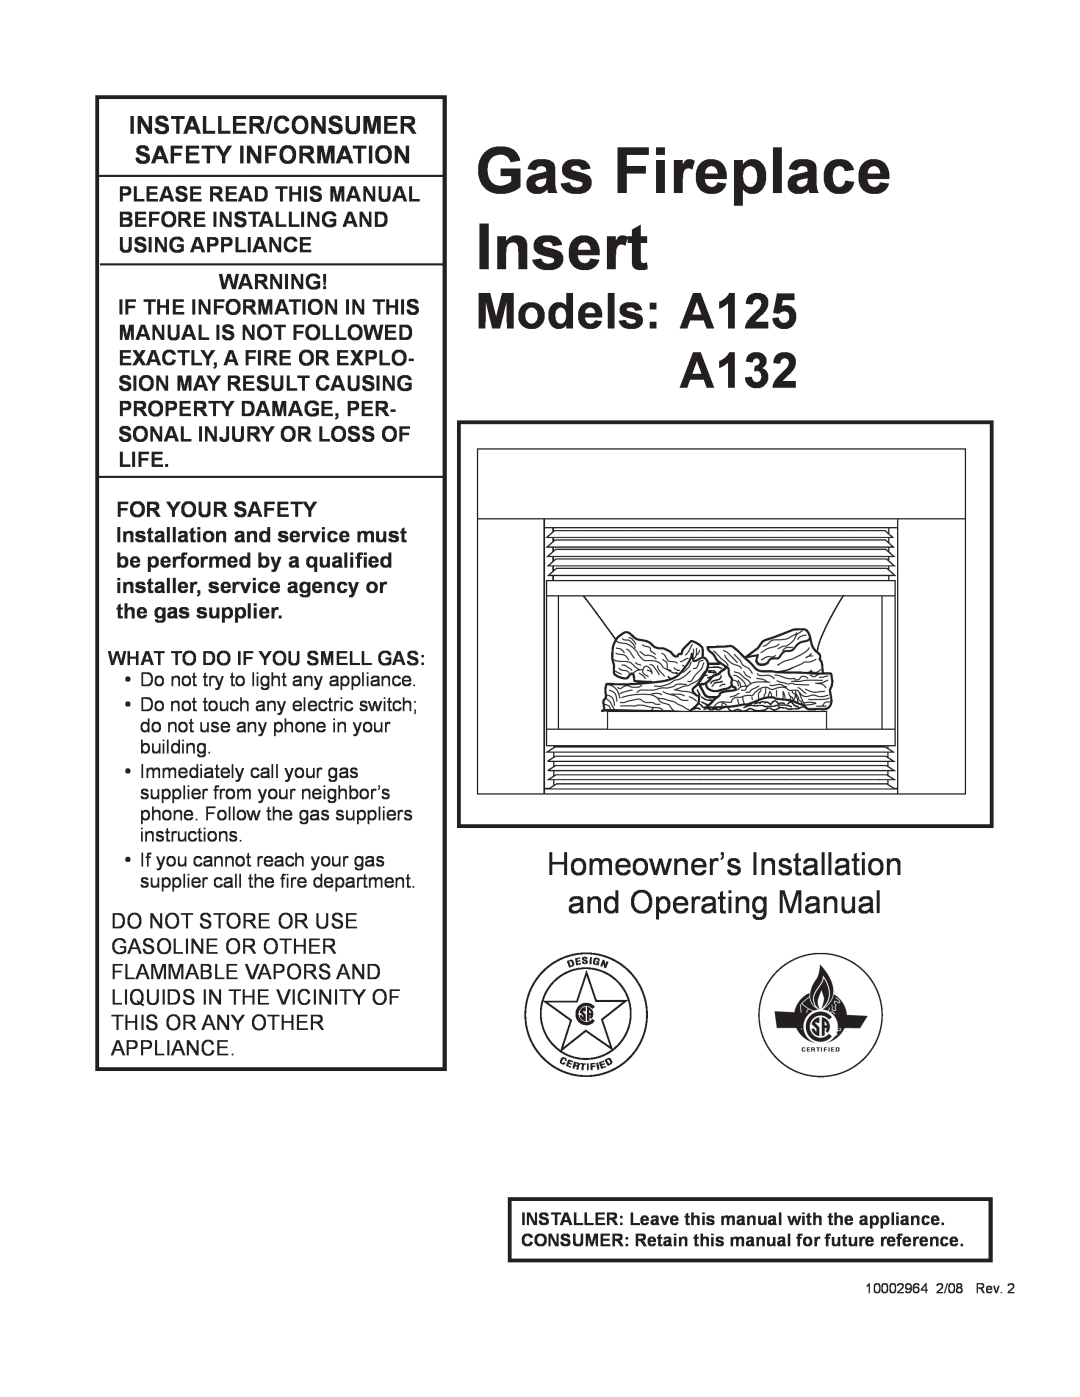 CFM Corporation manual Gas Fireplace Insert, Models A125 A132, Homeowner’s Installation and Operating Manual 